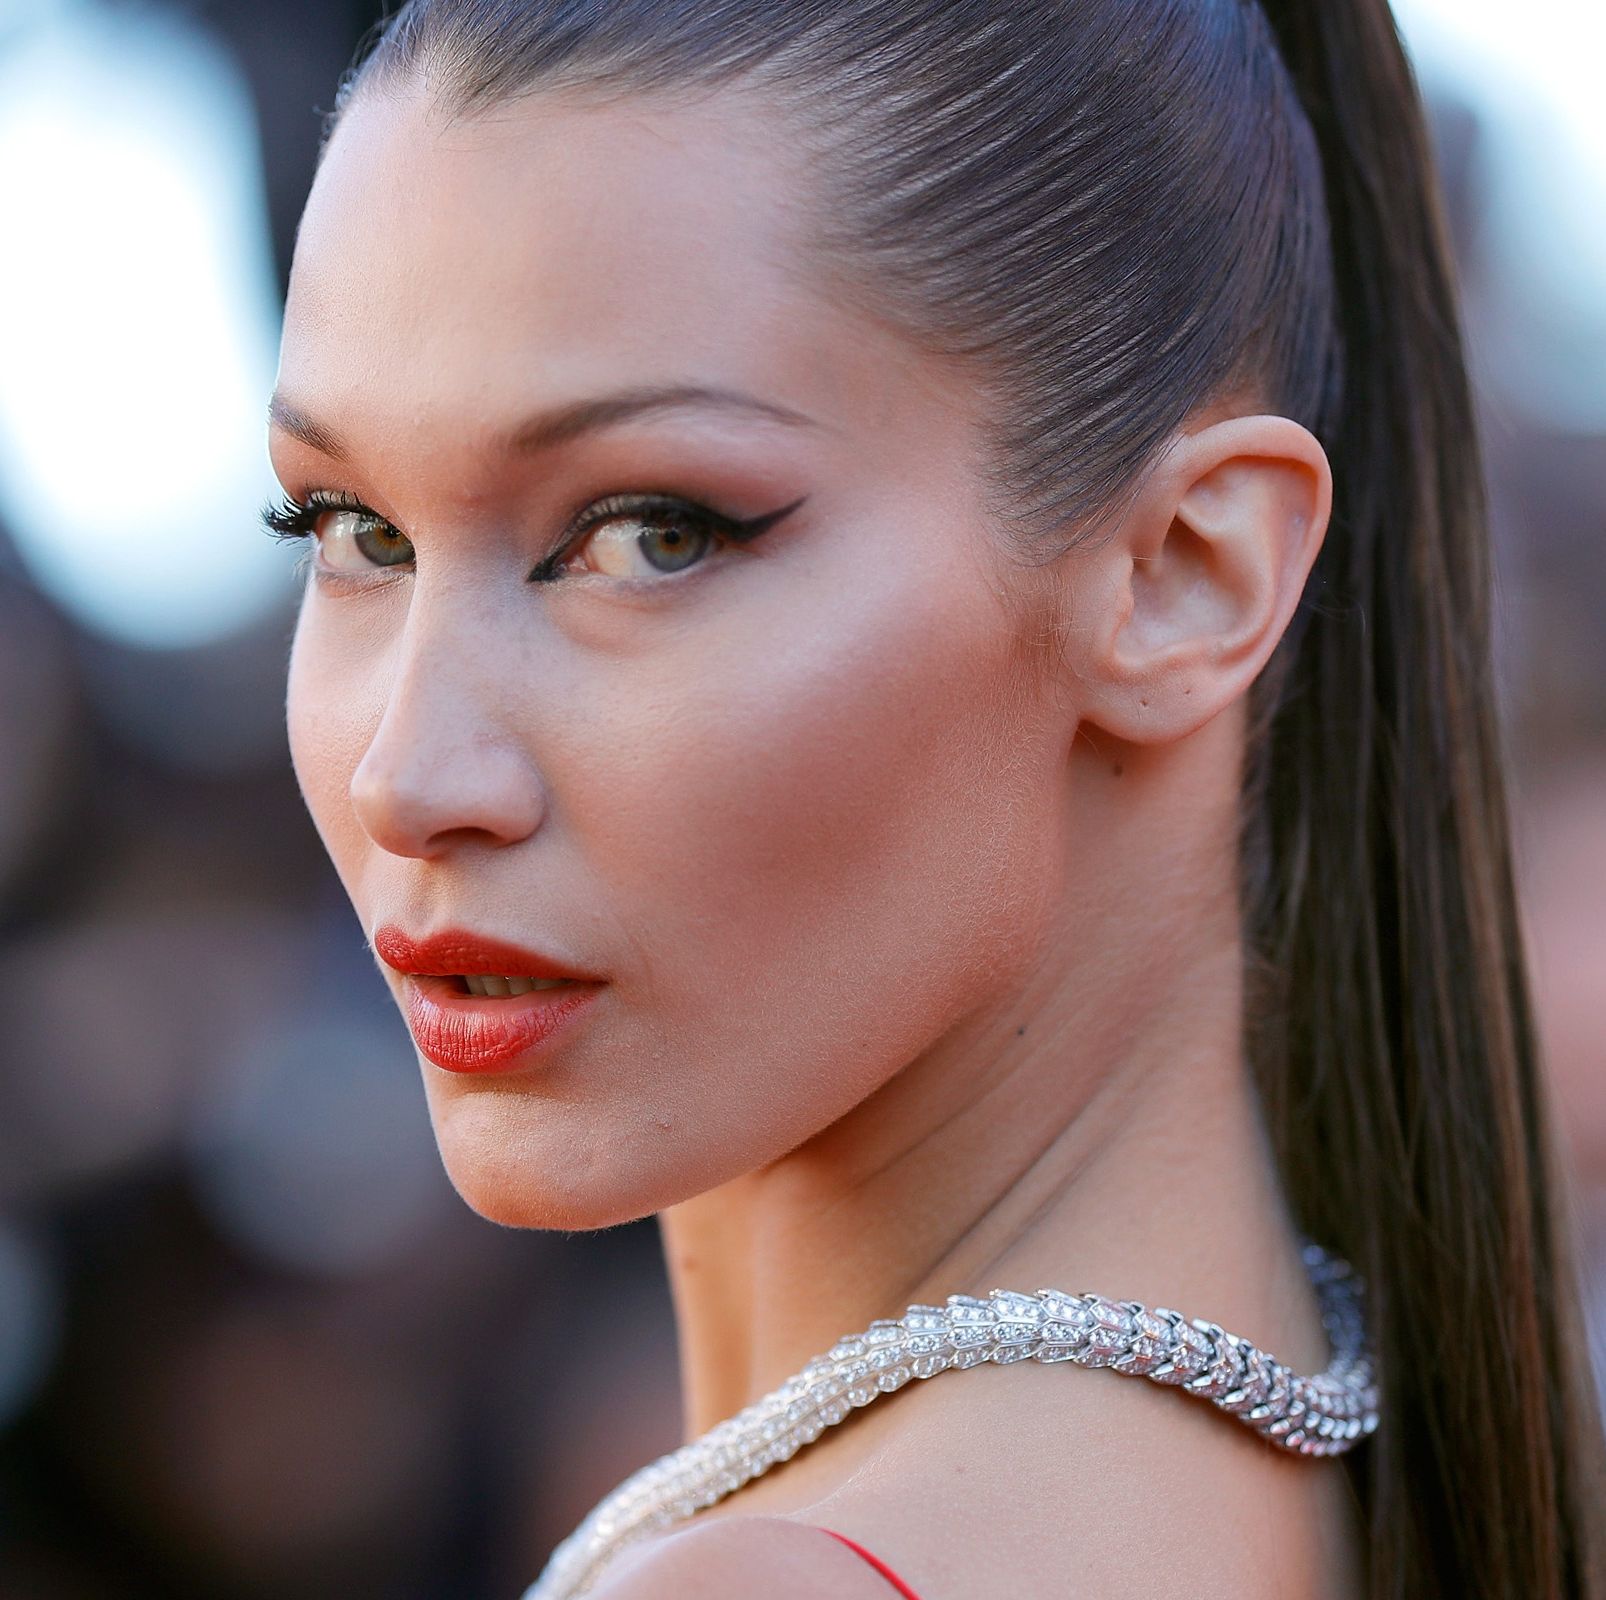 Bella Hadid Just Debuted a Jet-Black Pixie Cut Hairstyle, Complete With a Micro-Fringe